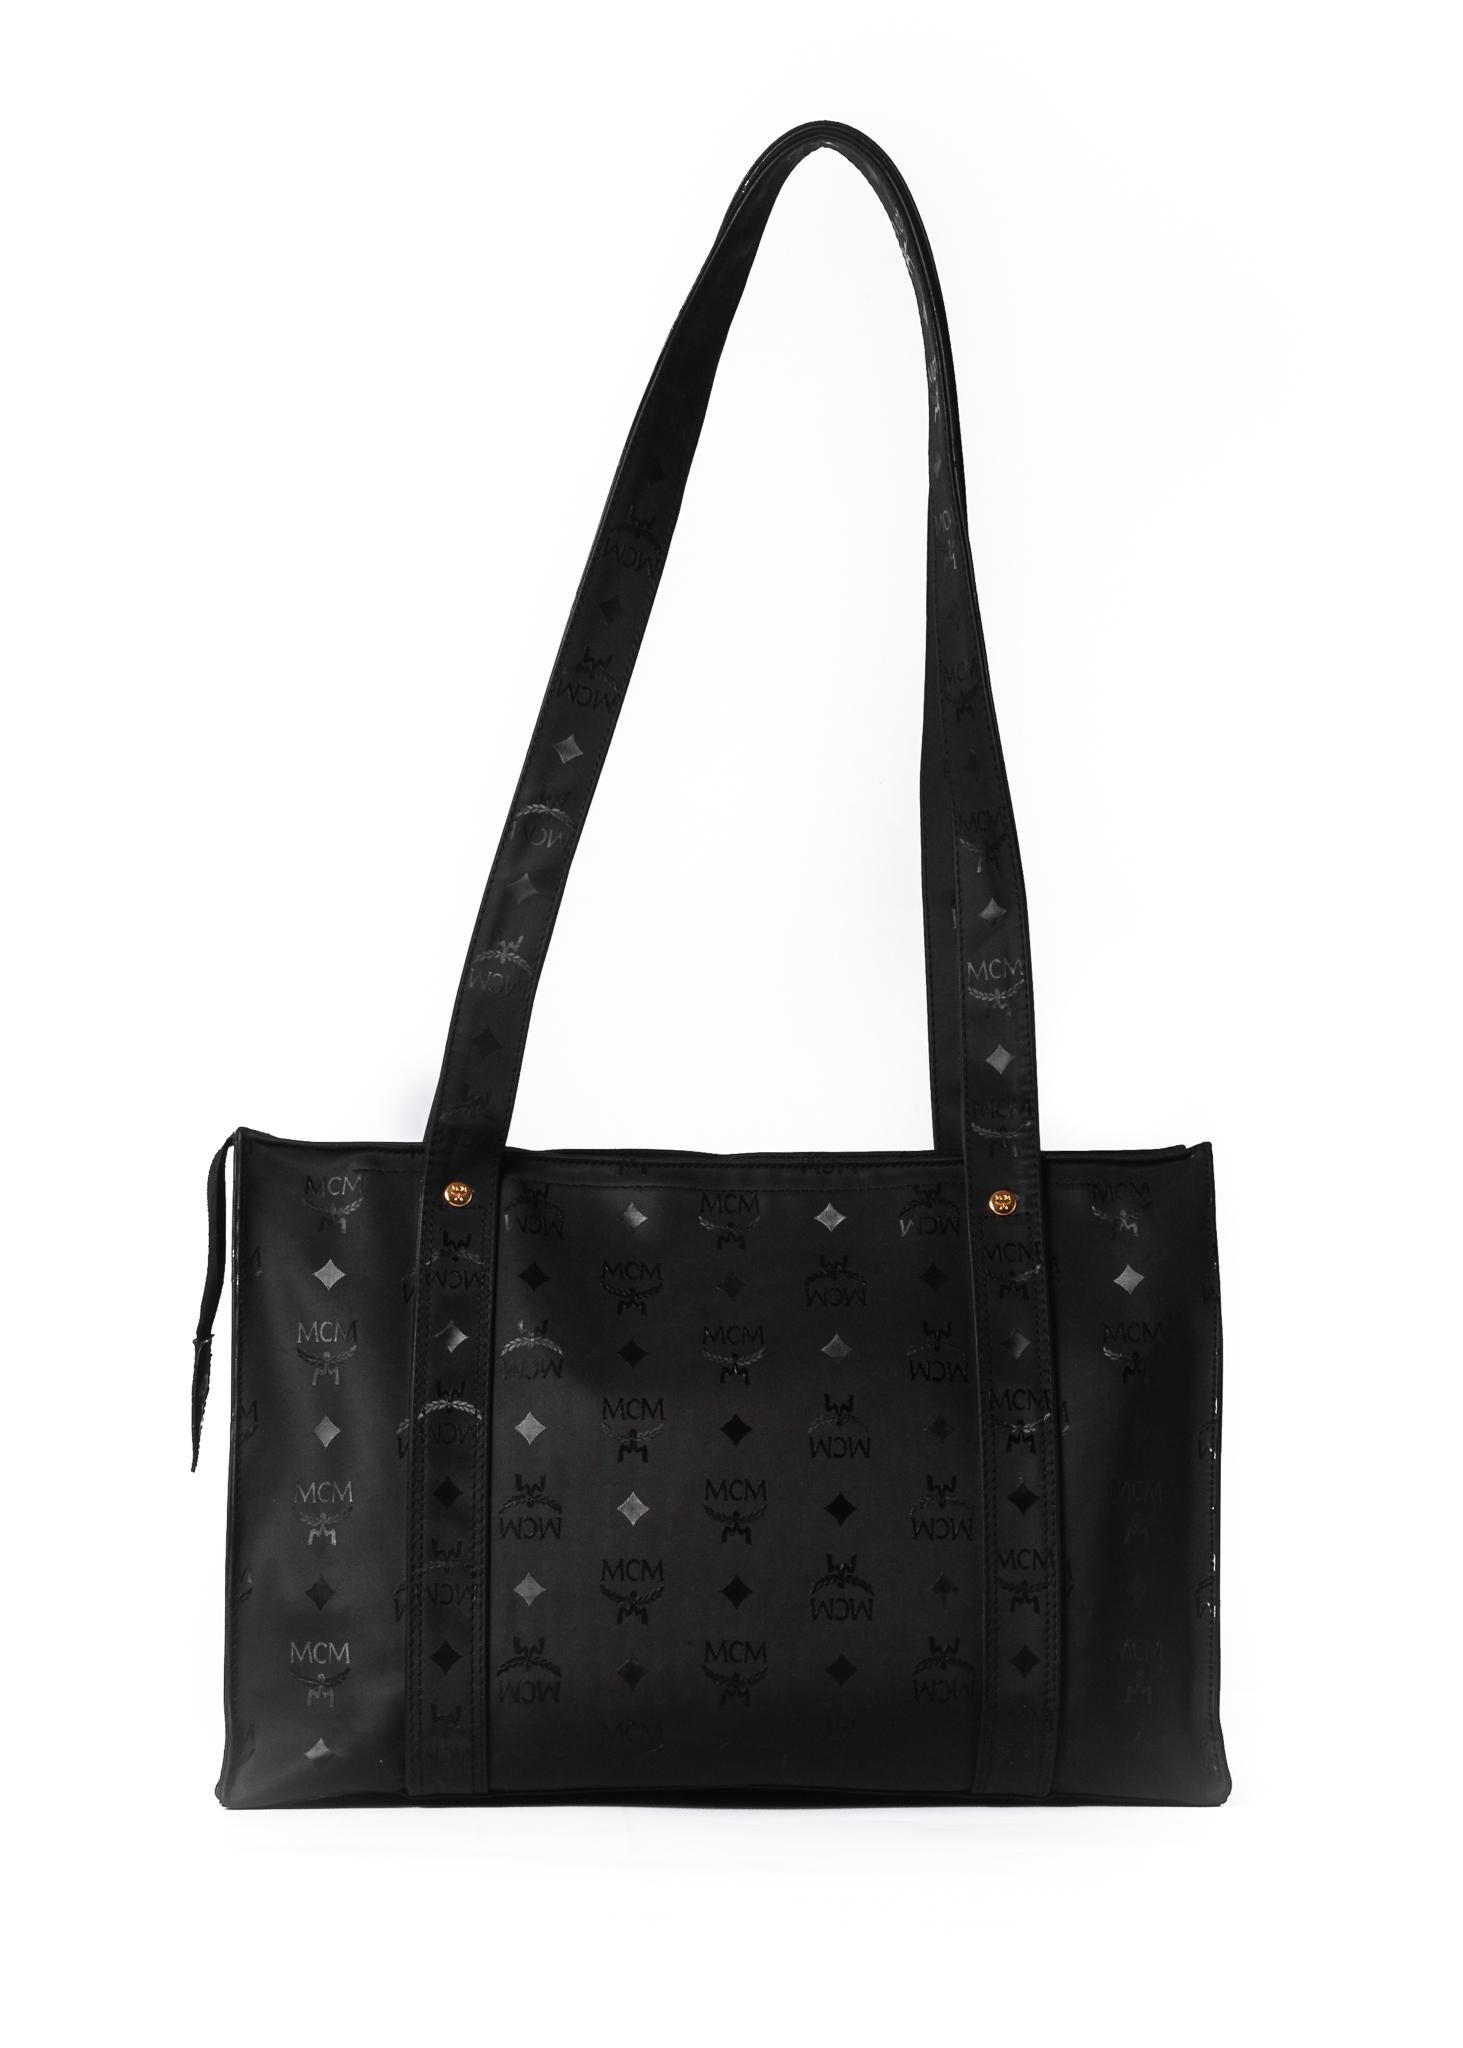 This MCM tote bag is made with black nylon. Waterproof. Features gold hardware, dual load flat shoulder straps, front slip pocket and a large spacious interior.

COLOR: Black
MATERIAL: Nylon and leather trim
ITEM CODE: M8296
MEASURES: H 10” x L 15”